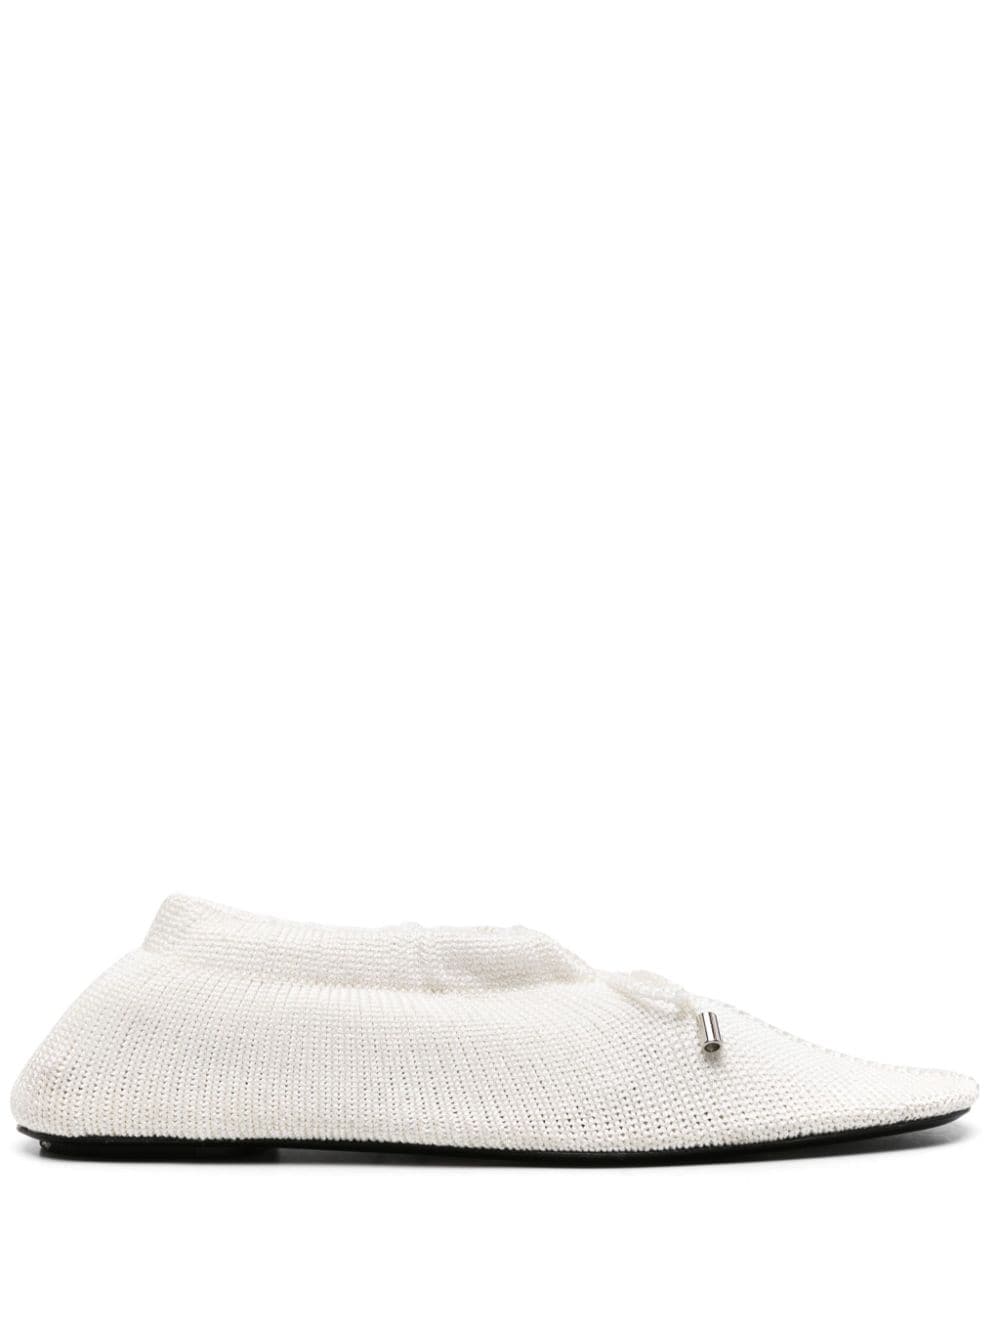 TOTEME The Knitted ballerina shoes - Neutrals von TOTEME